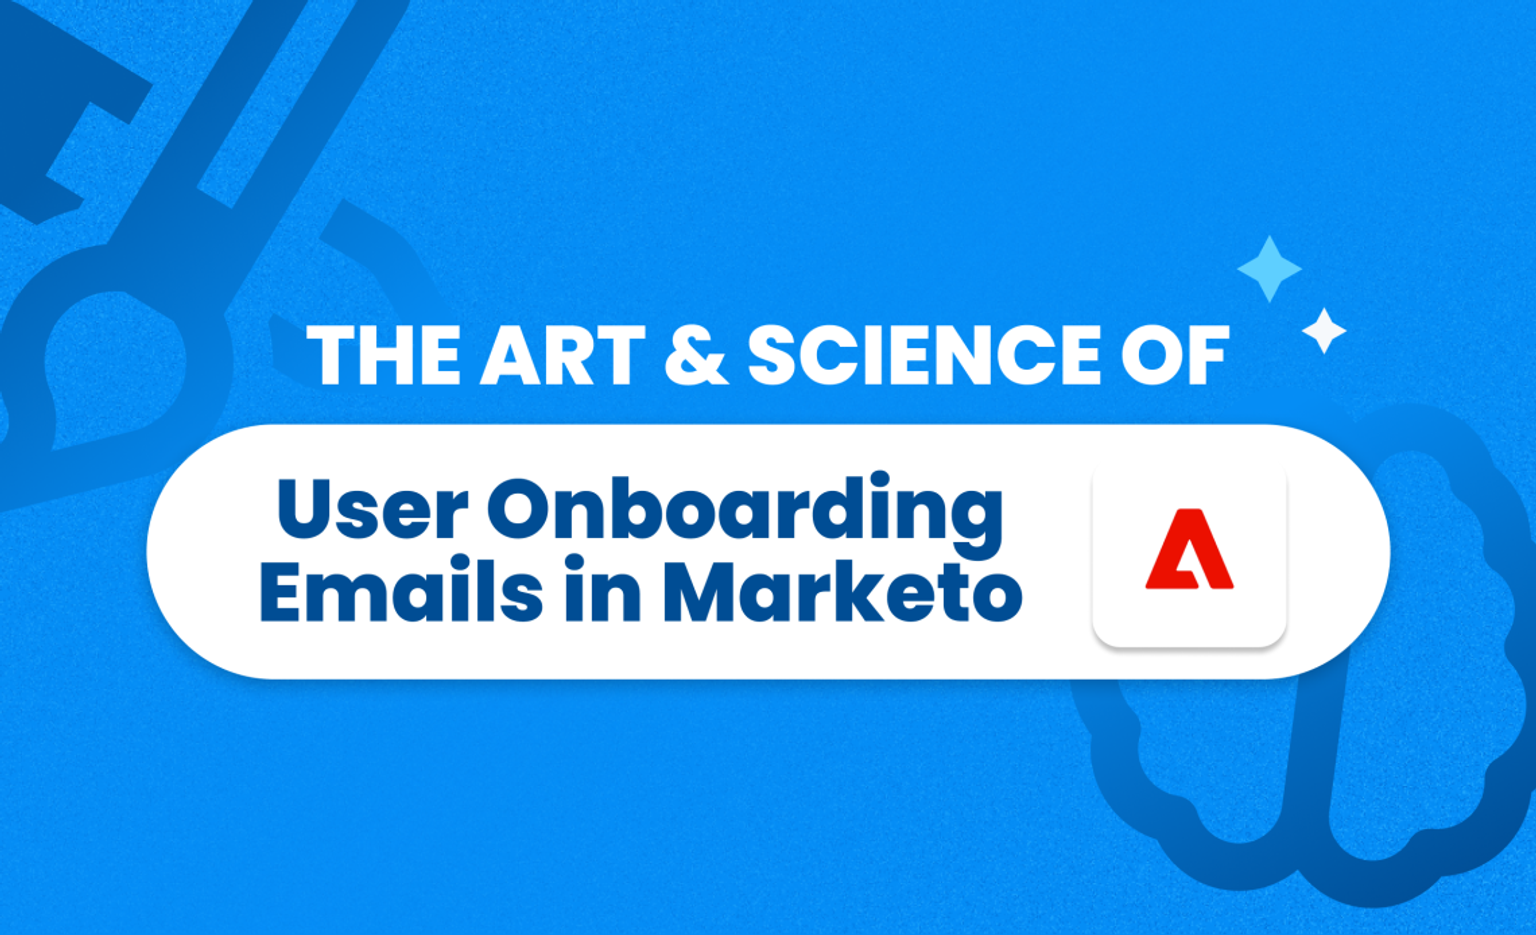 The art and science of user onboarding emails in Marketo